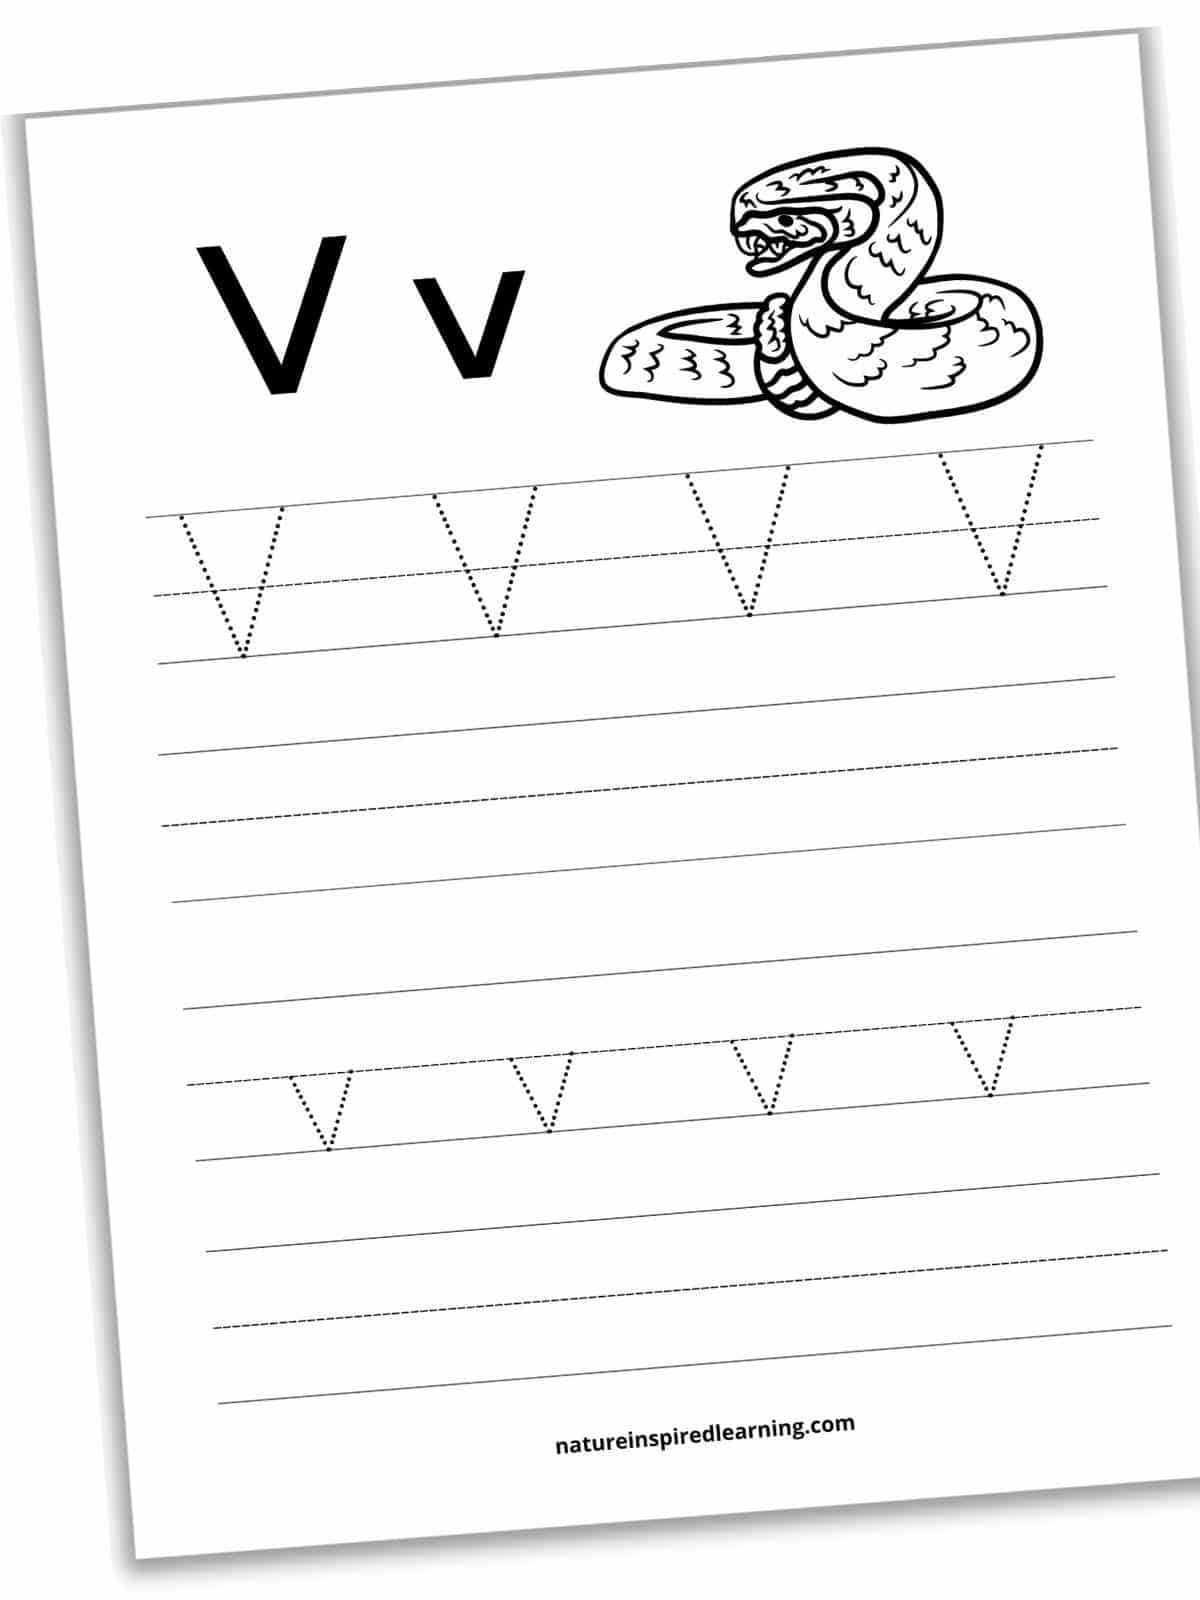 Worksheet with black and white viper snake at the top with lines and letter V and v's in dotted font